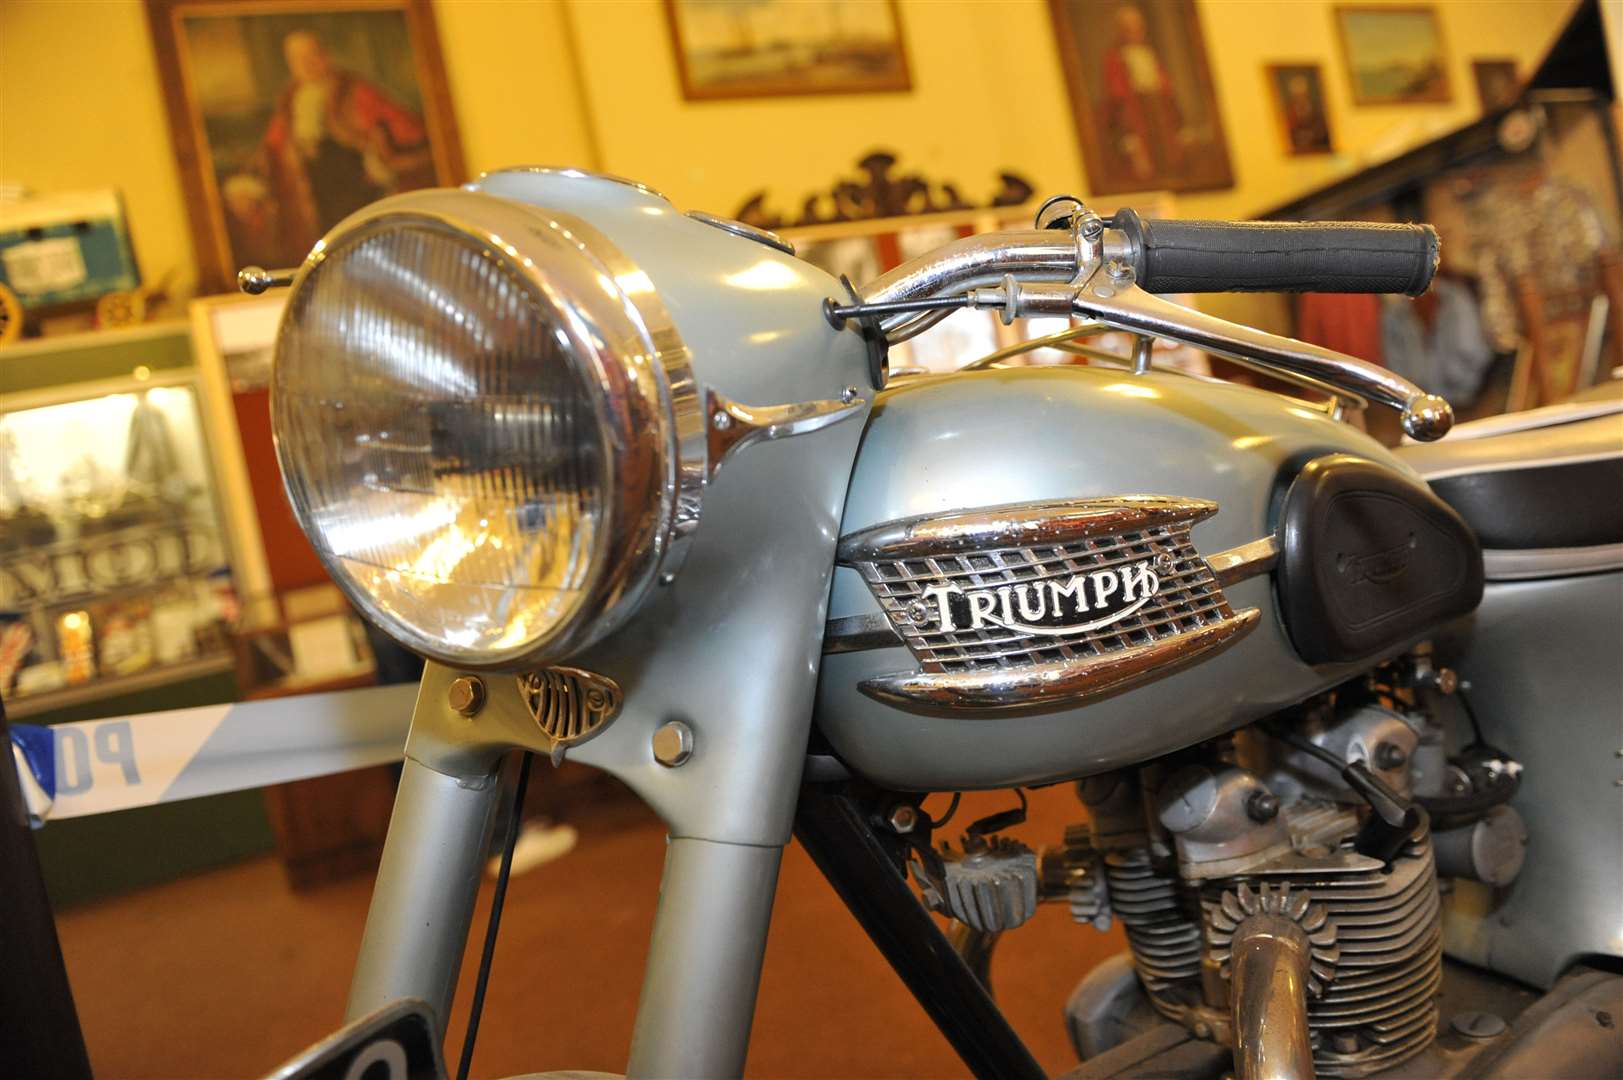 While the Mods had their scooters, the Rockers preferred motorbikes - such as this Triumph